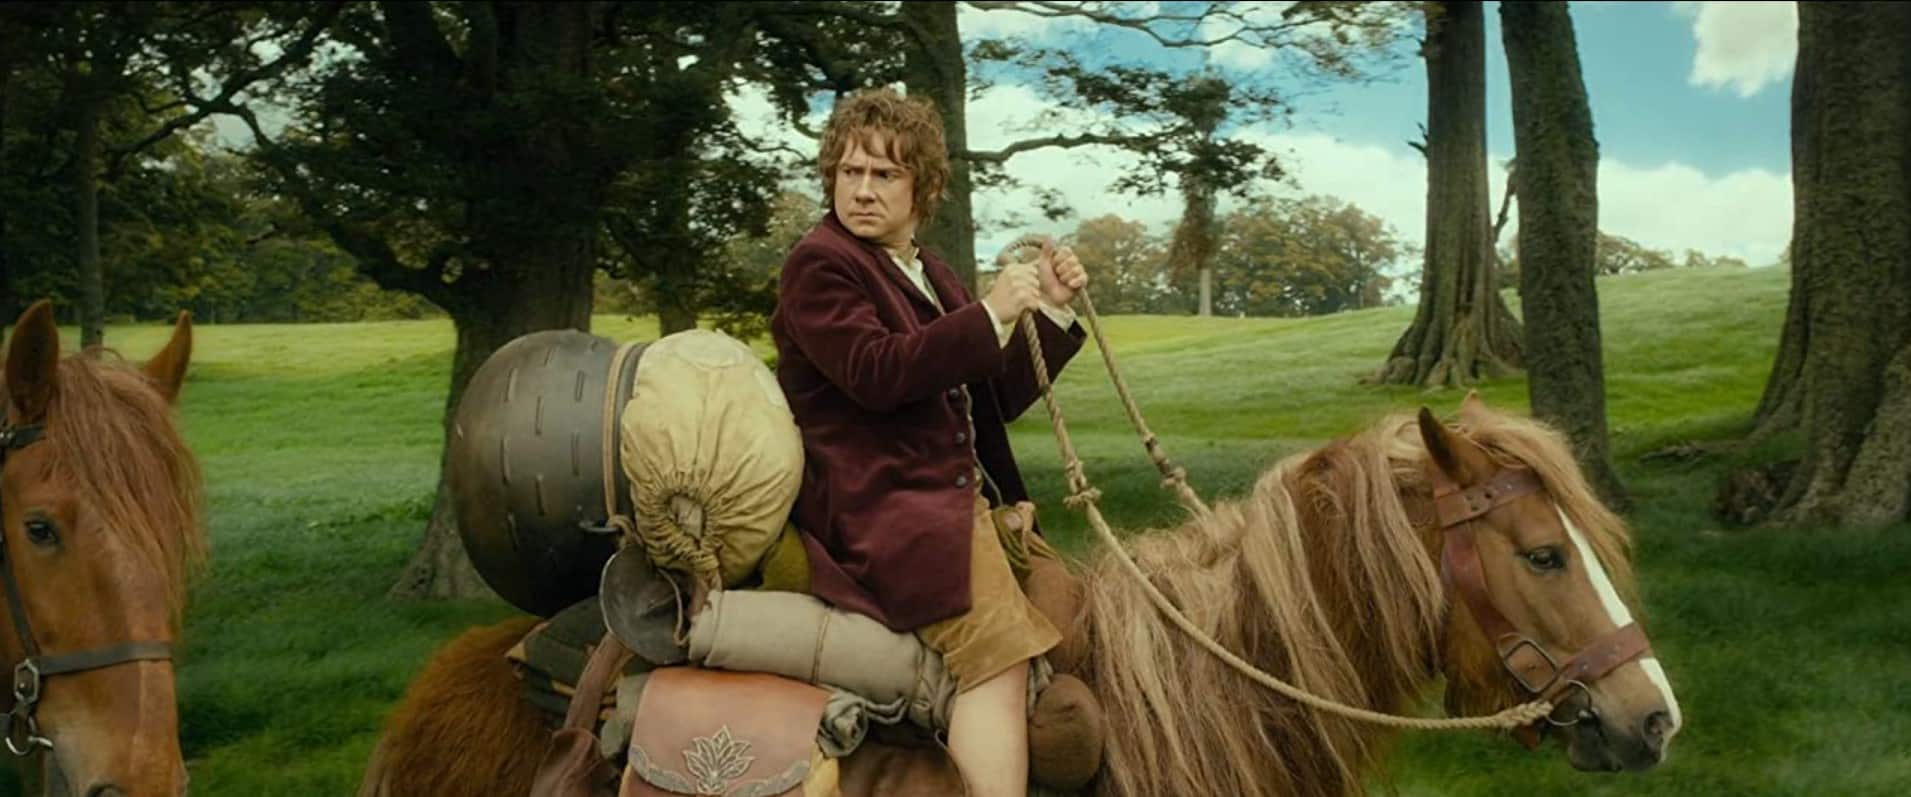 A hobbit rides a pony in this image from HBO Max 